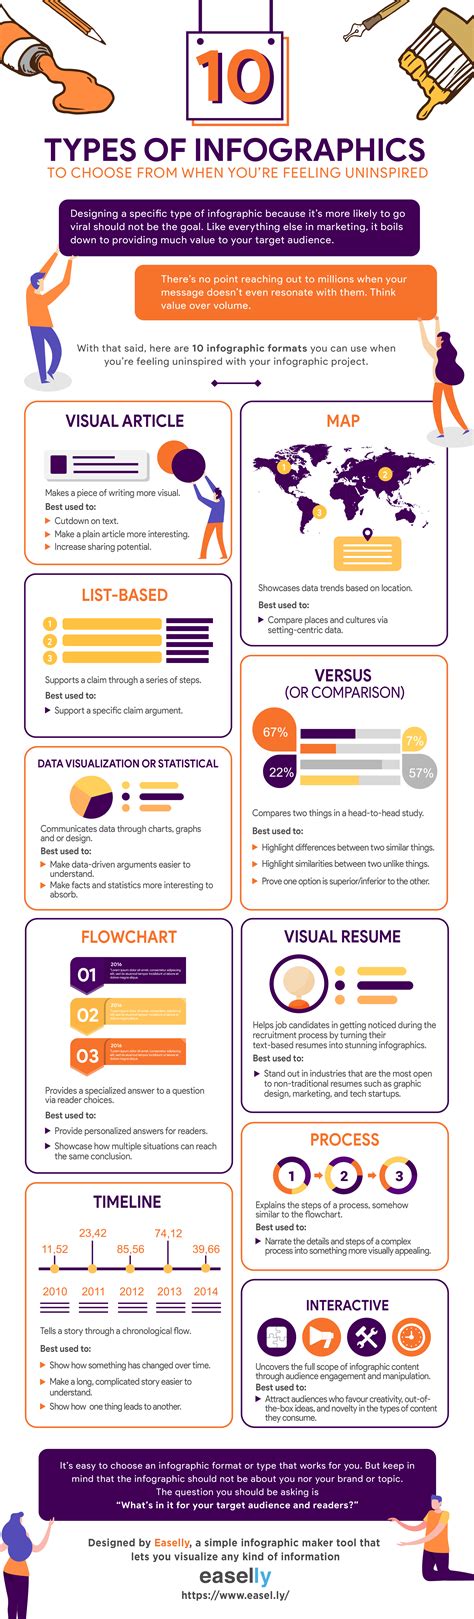 Types Of Infographics With Examples And When To Use Them